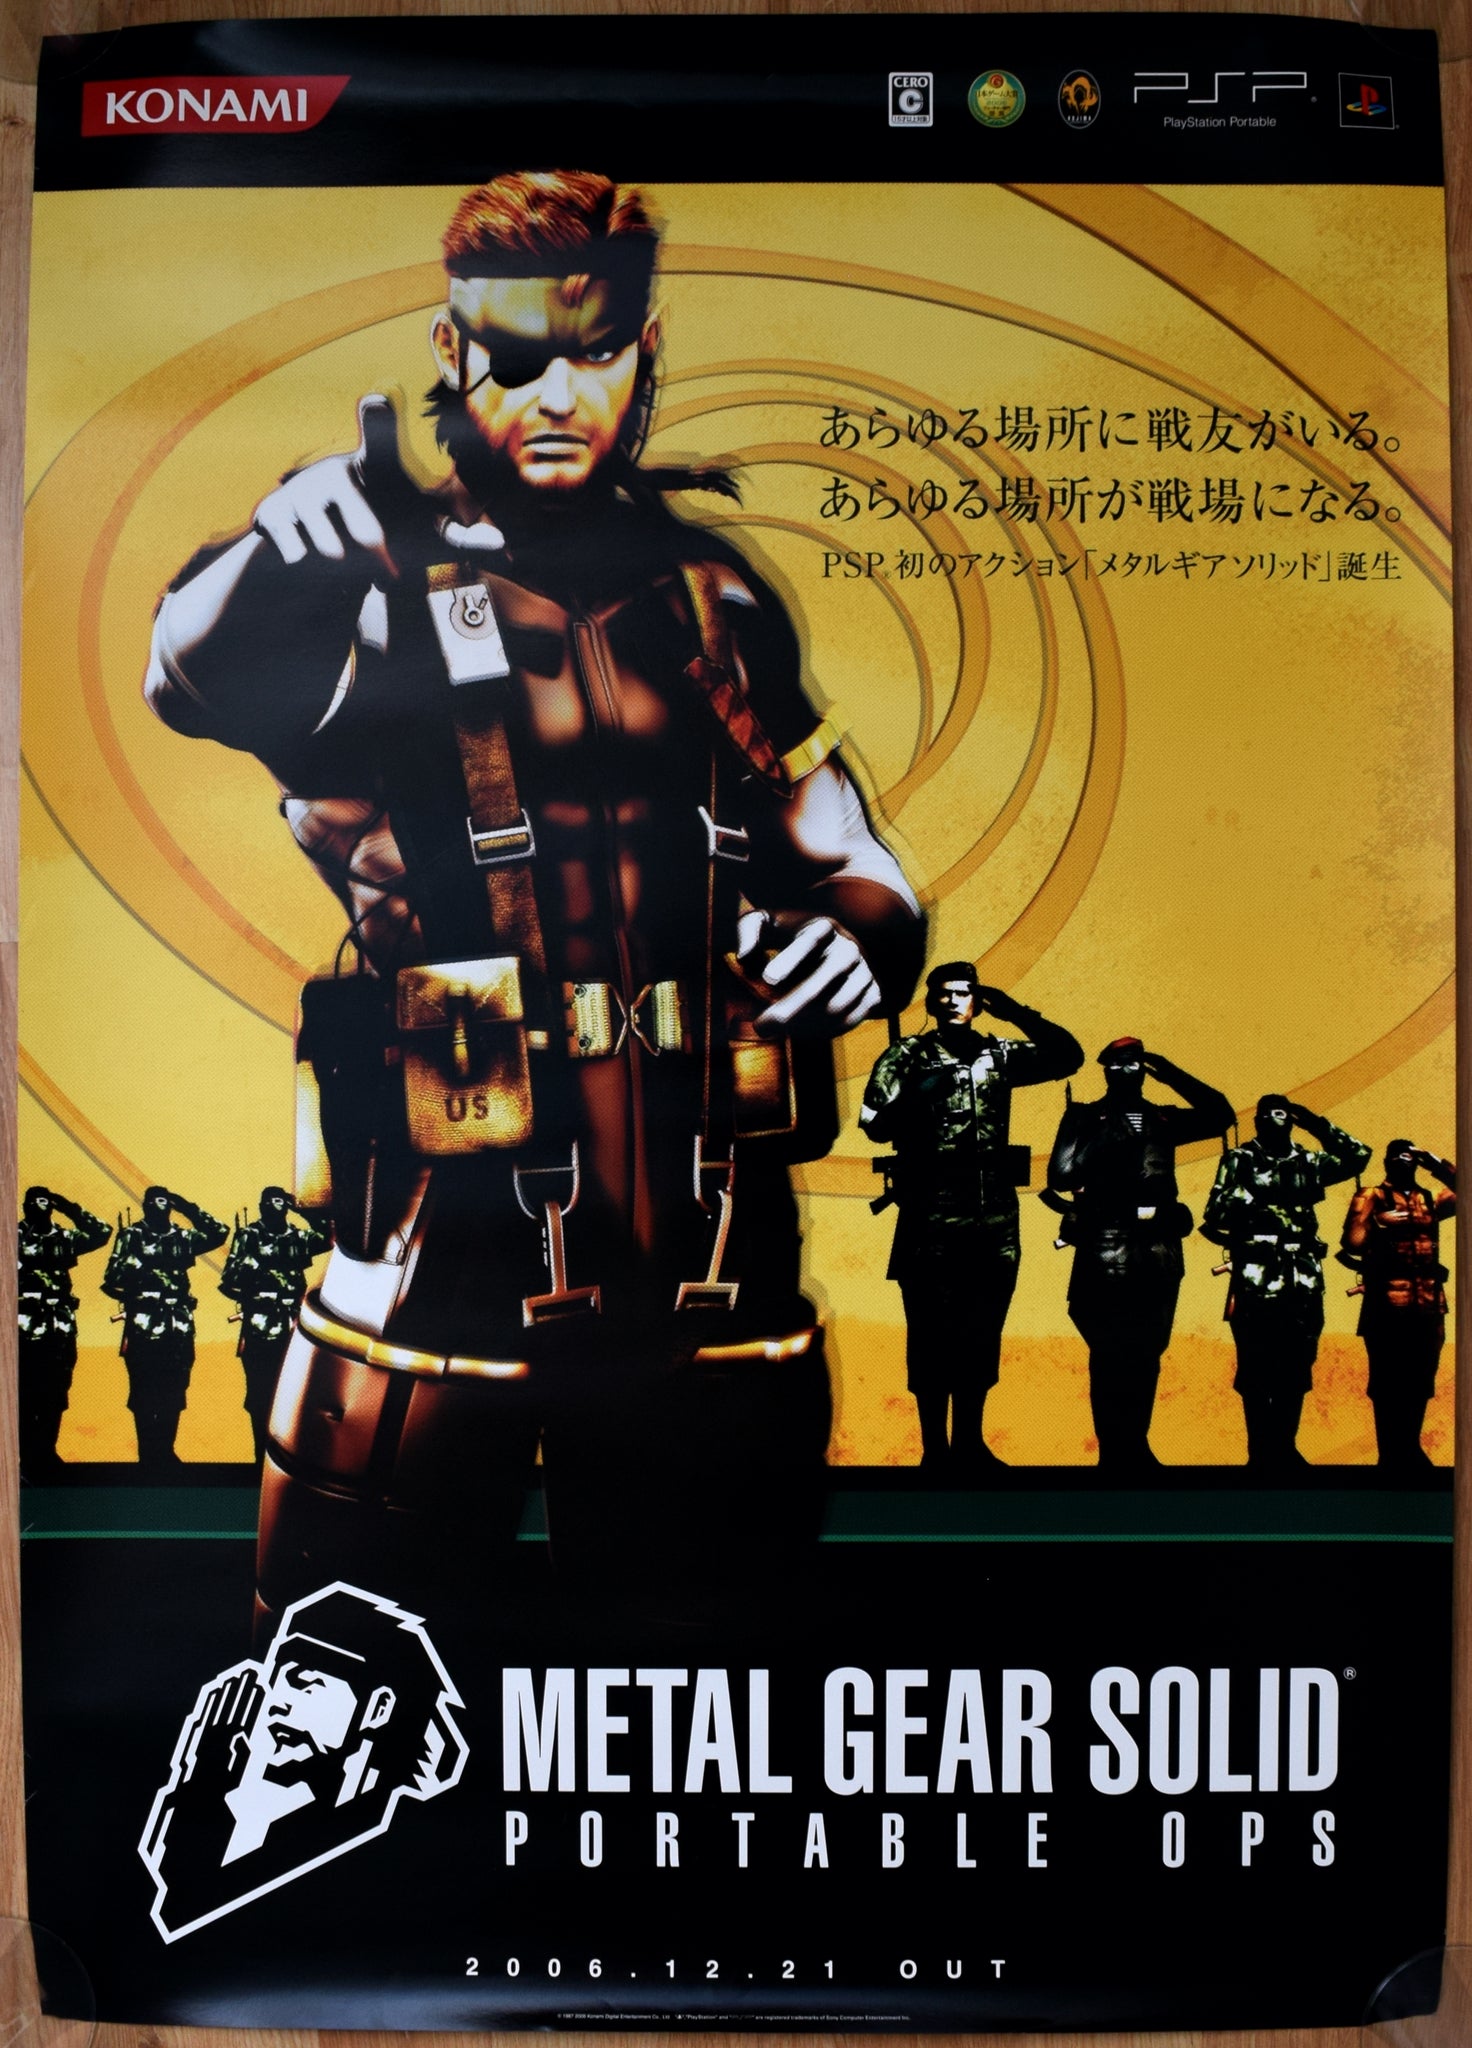 Metal Gear Solid Portable Ops 51.5 cm x 73 cm Promotional Poster 